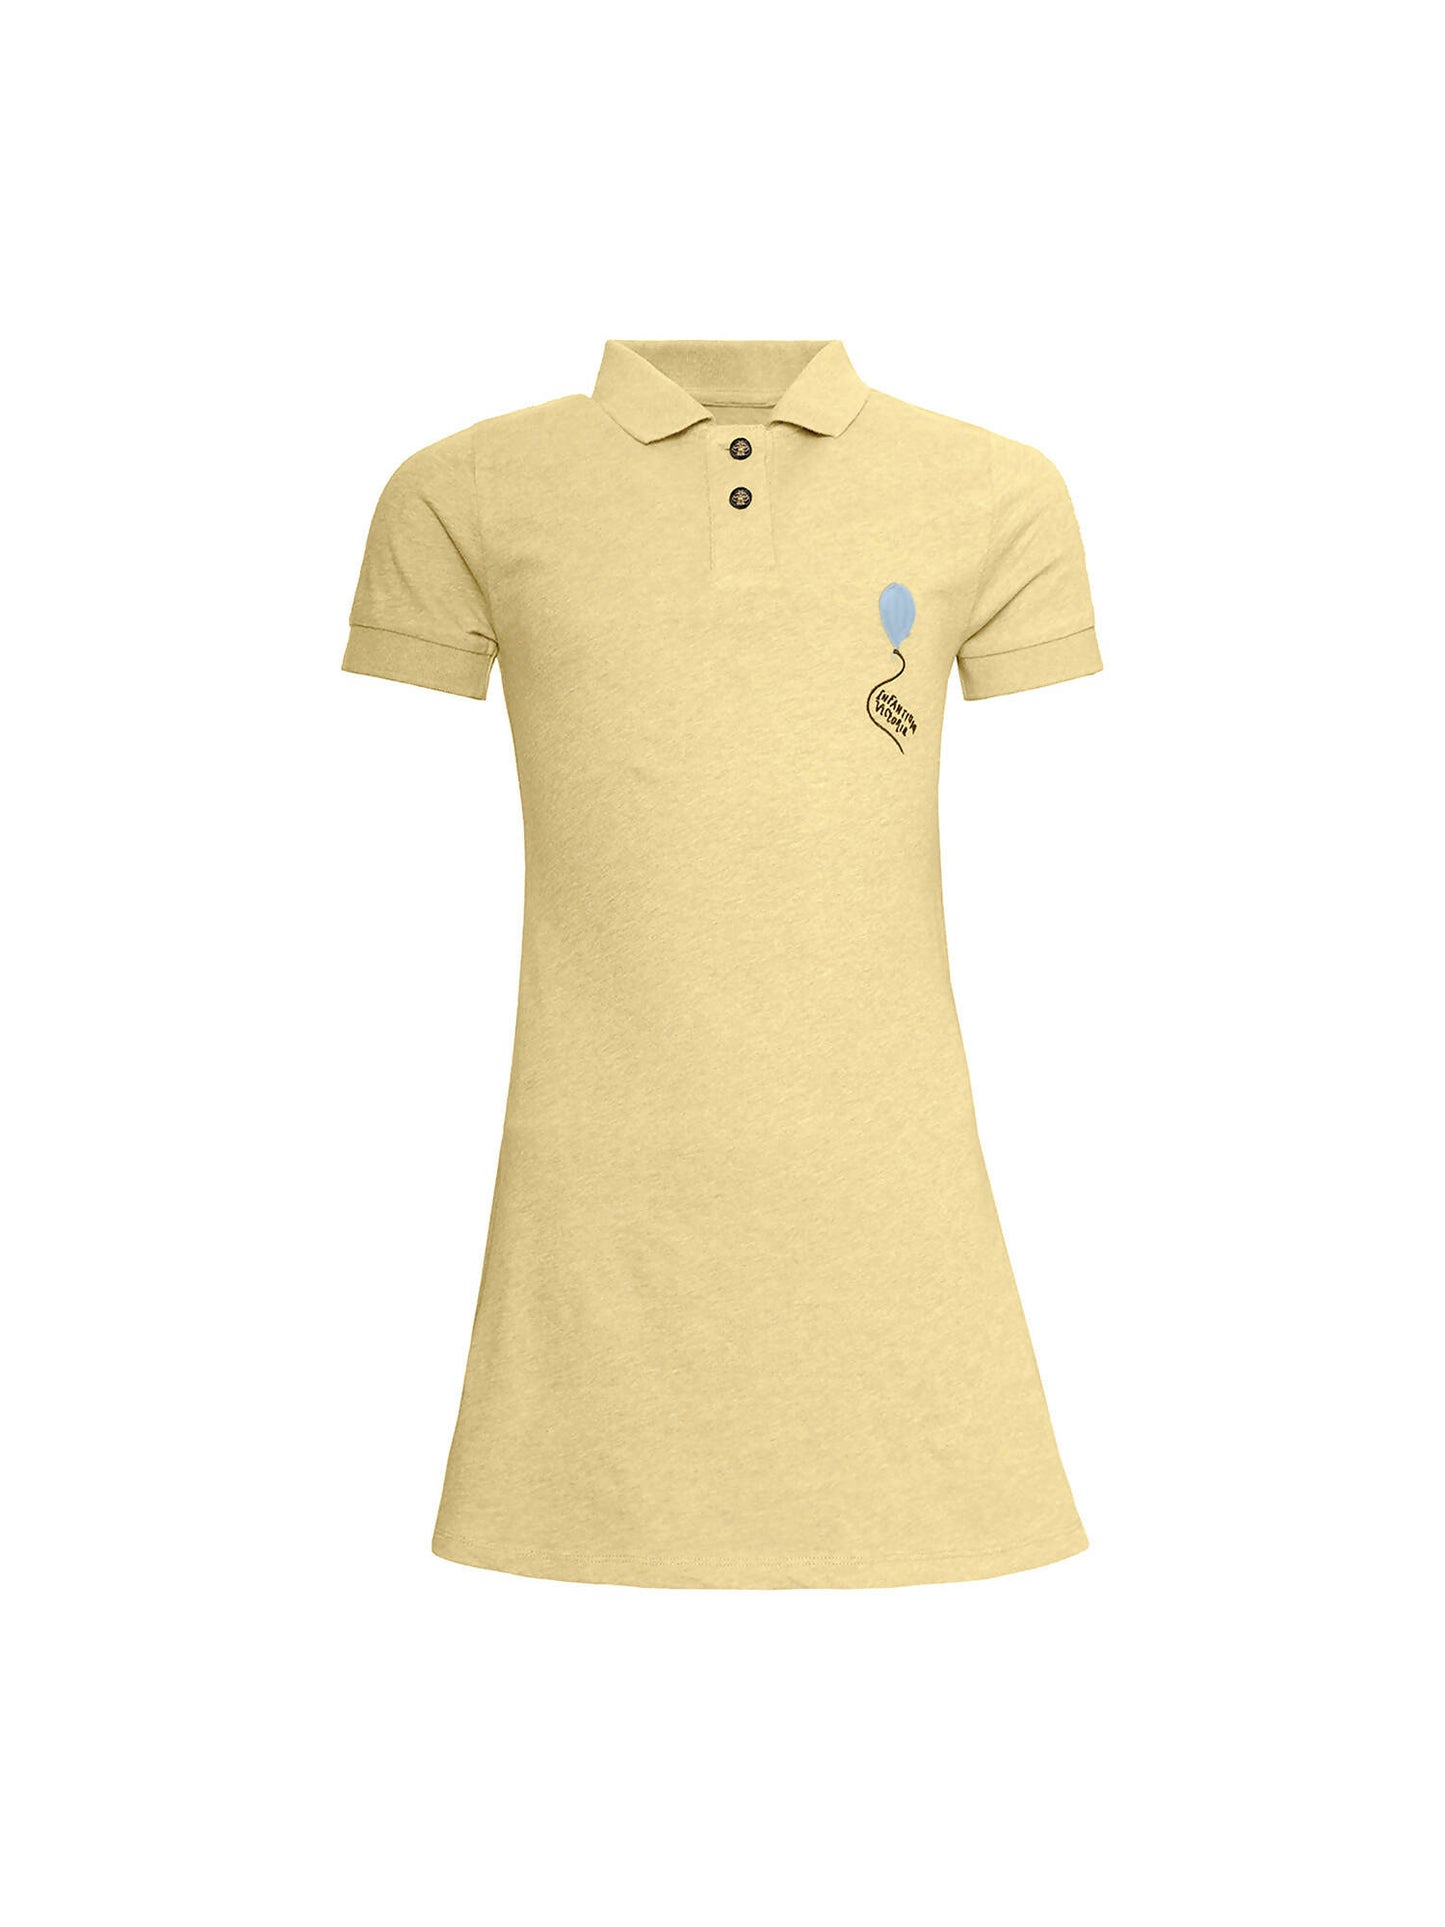 Yellow Polo Dress for Girls